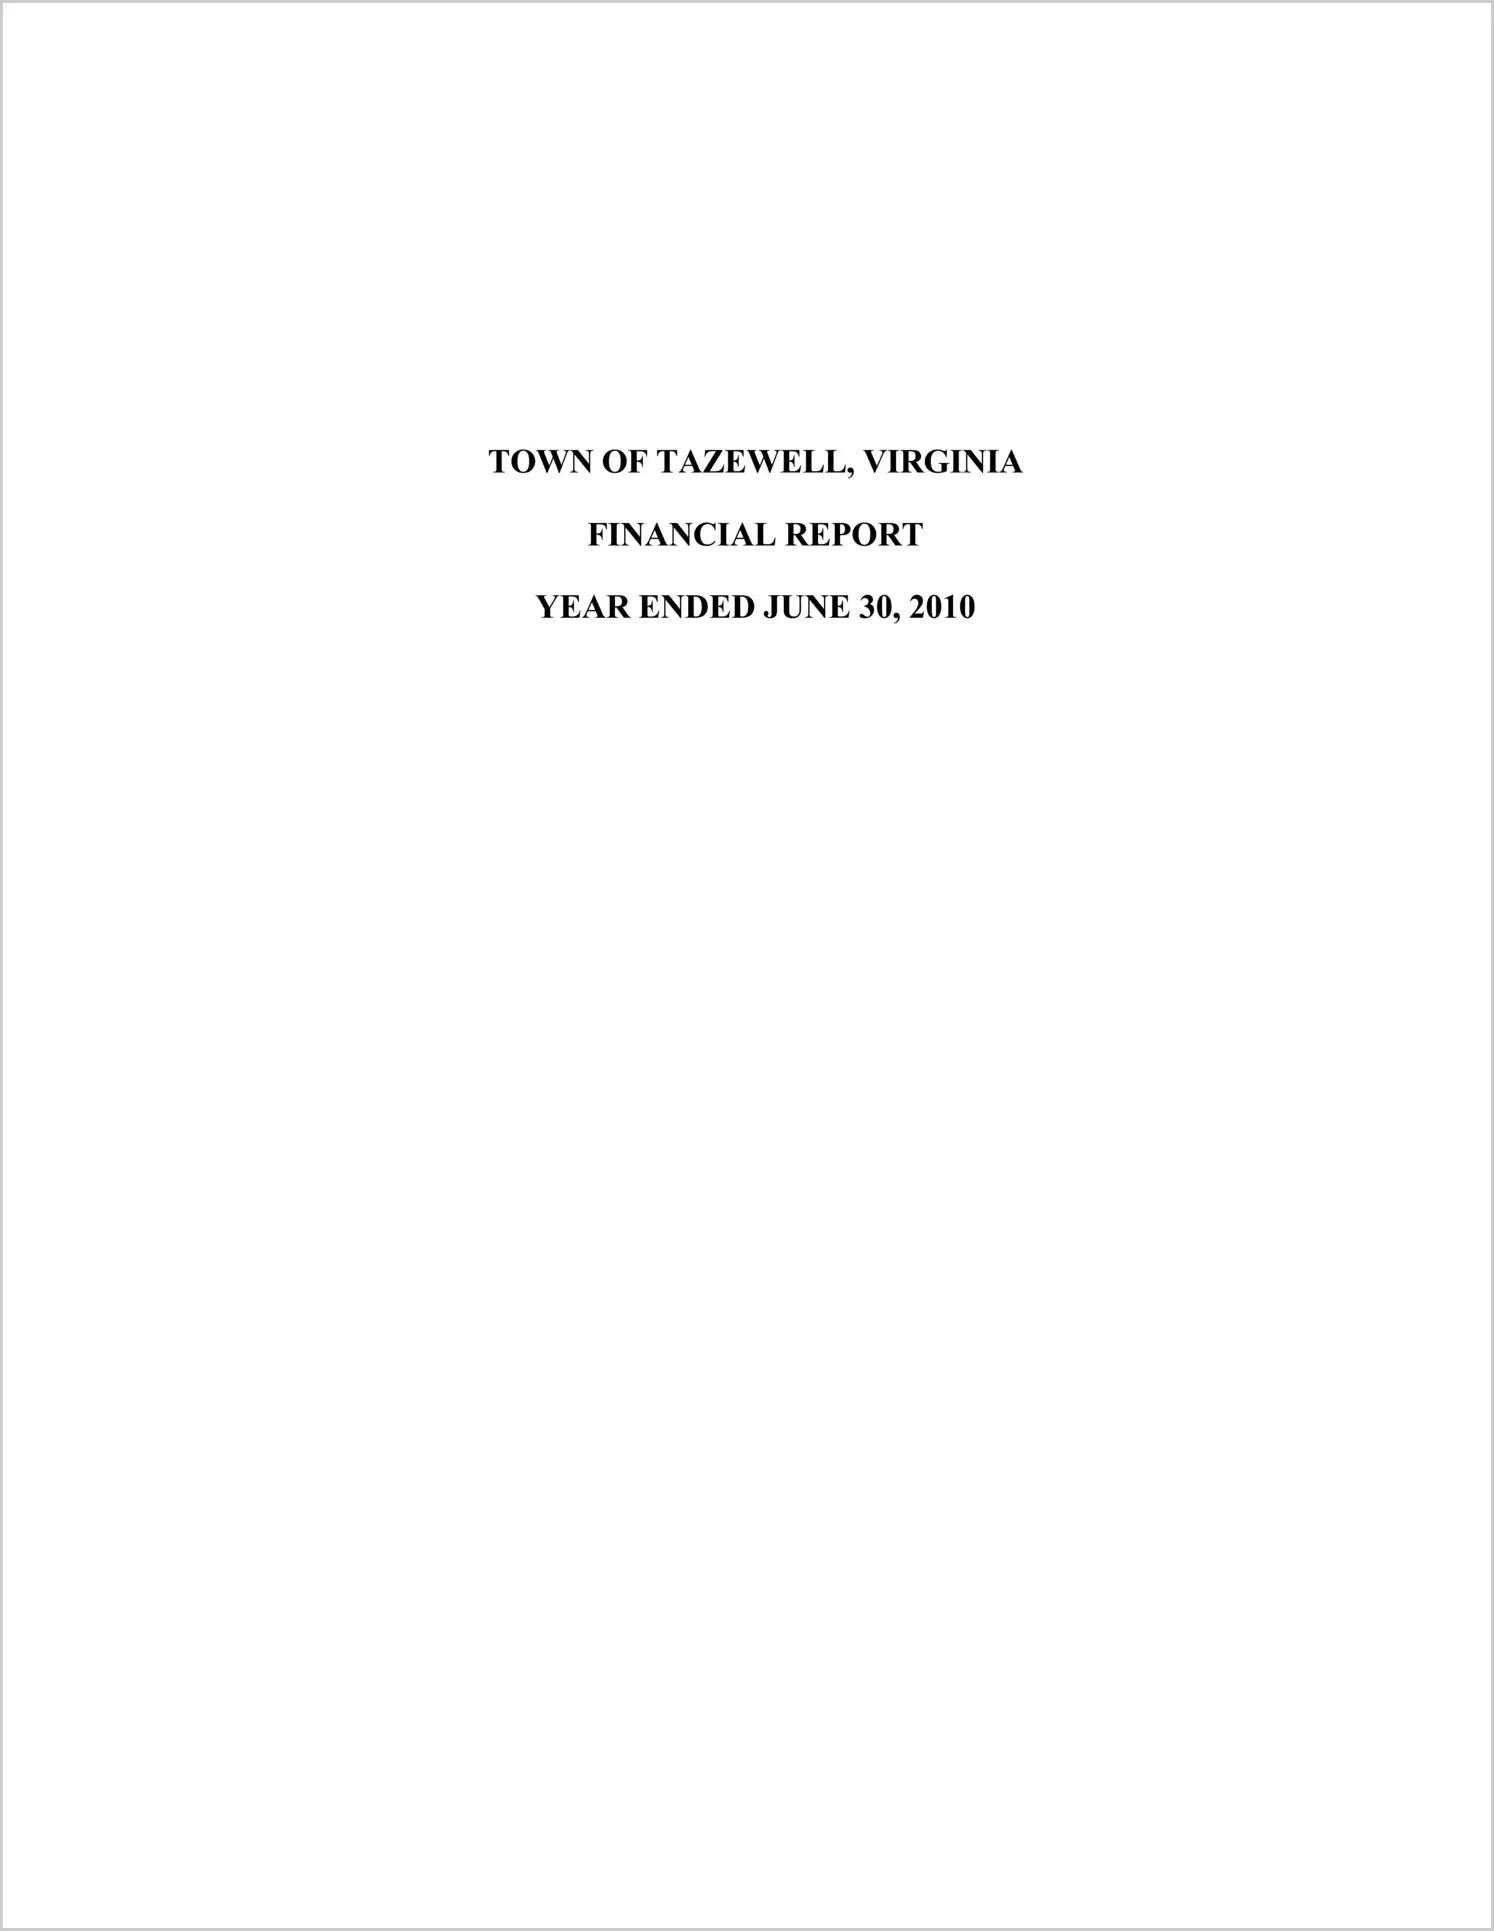 2010 Annual Financial Report for Town of Tazewell